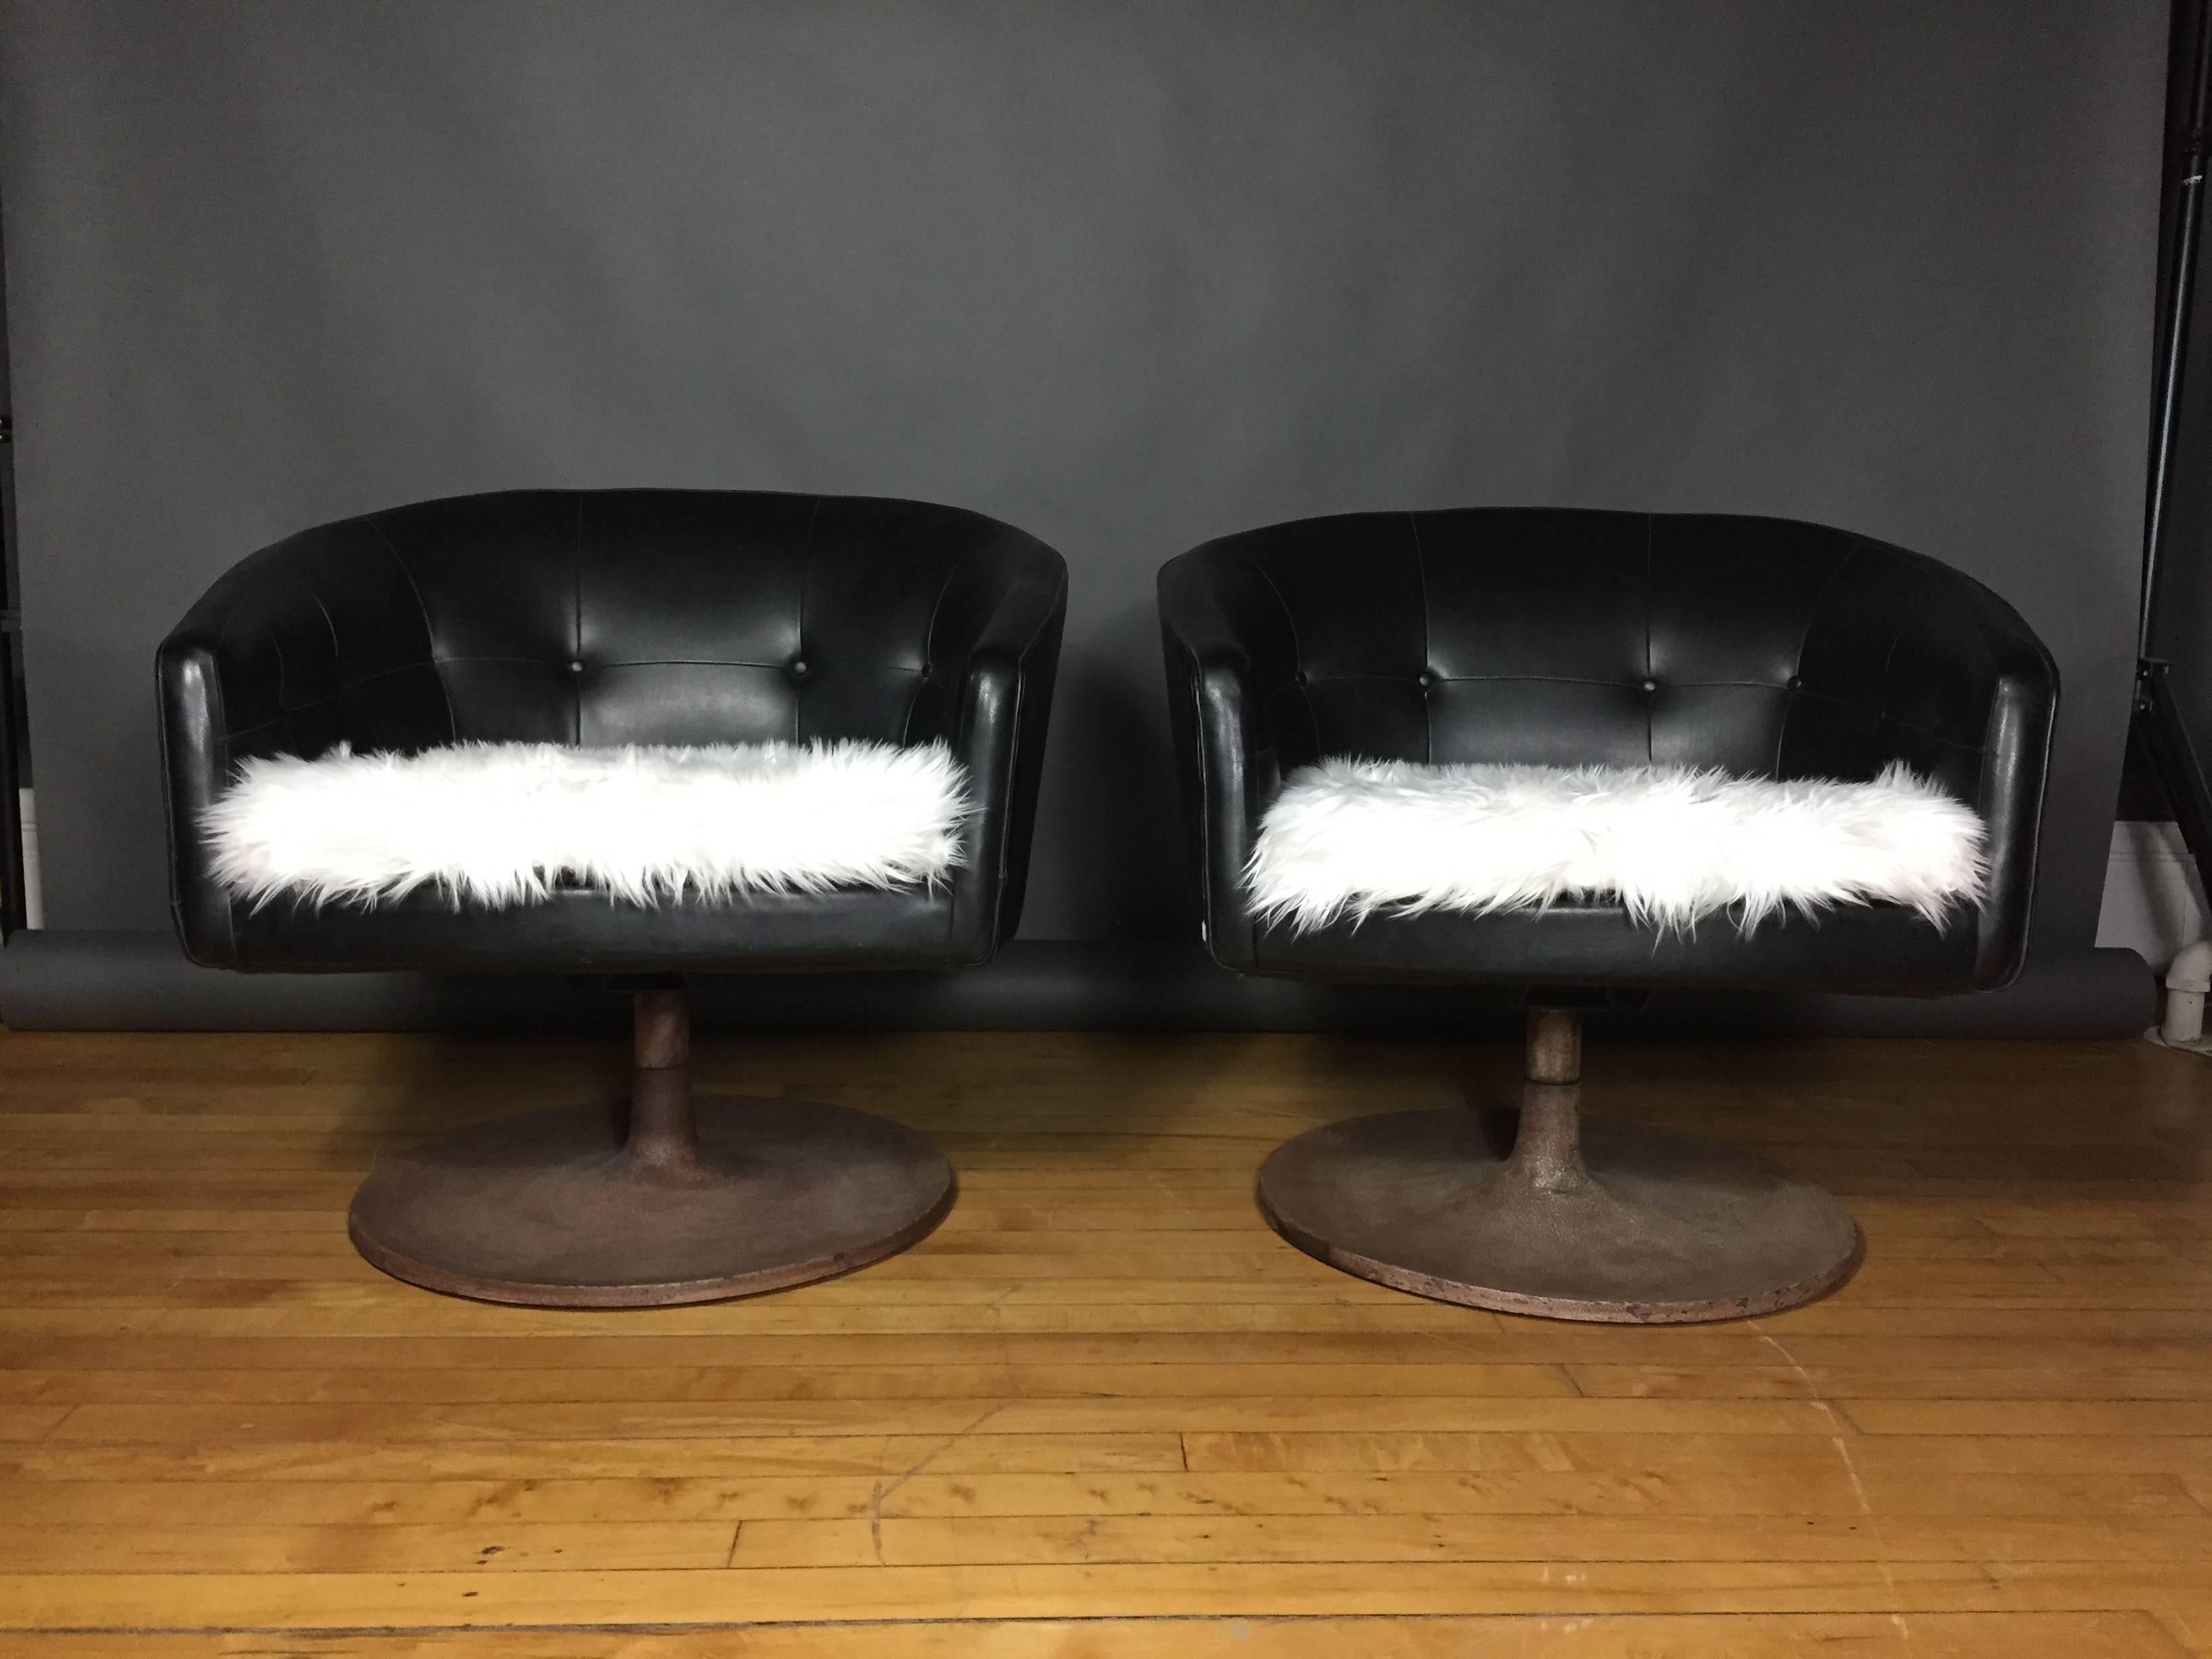 Very sleek pair of lounge chairs by Jens Risom, late 1960s or early 1970s with a low tufted back and frame in black Naugahyde. Contrasting white faux fur seating (not original) and heavy textured metal swivel base. Solid. Two small areas of seam